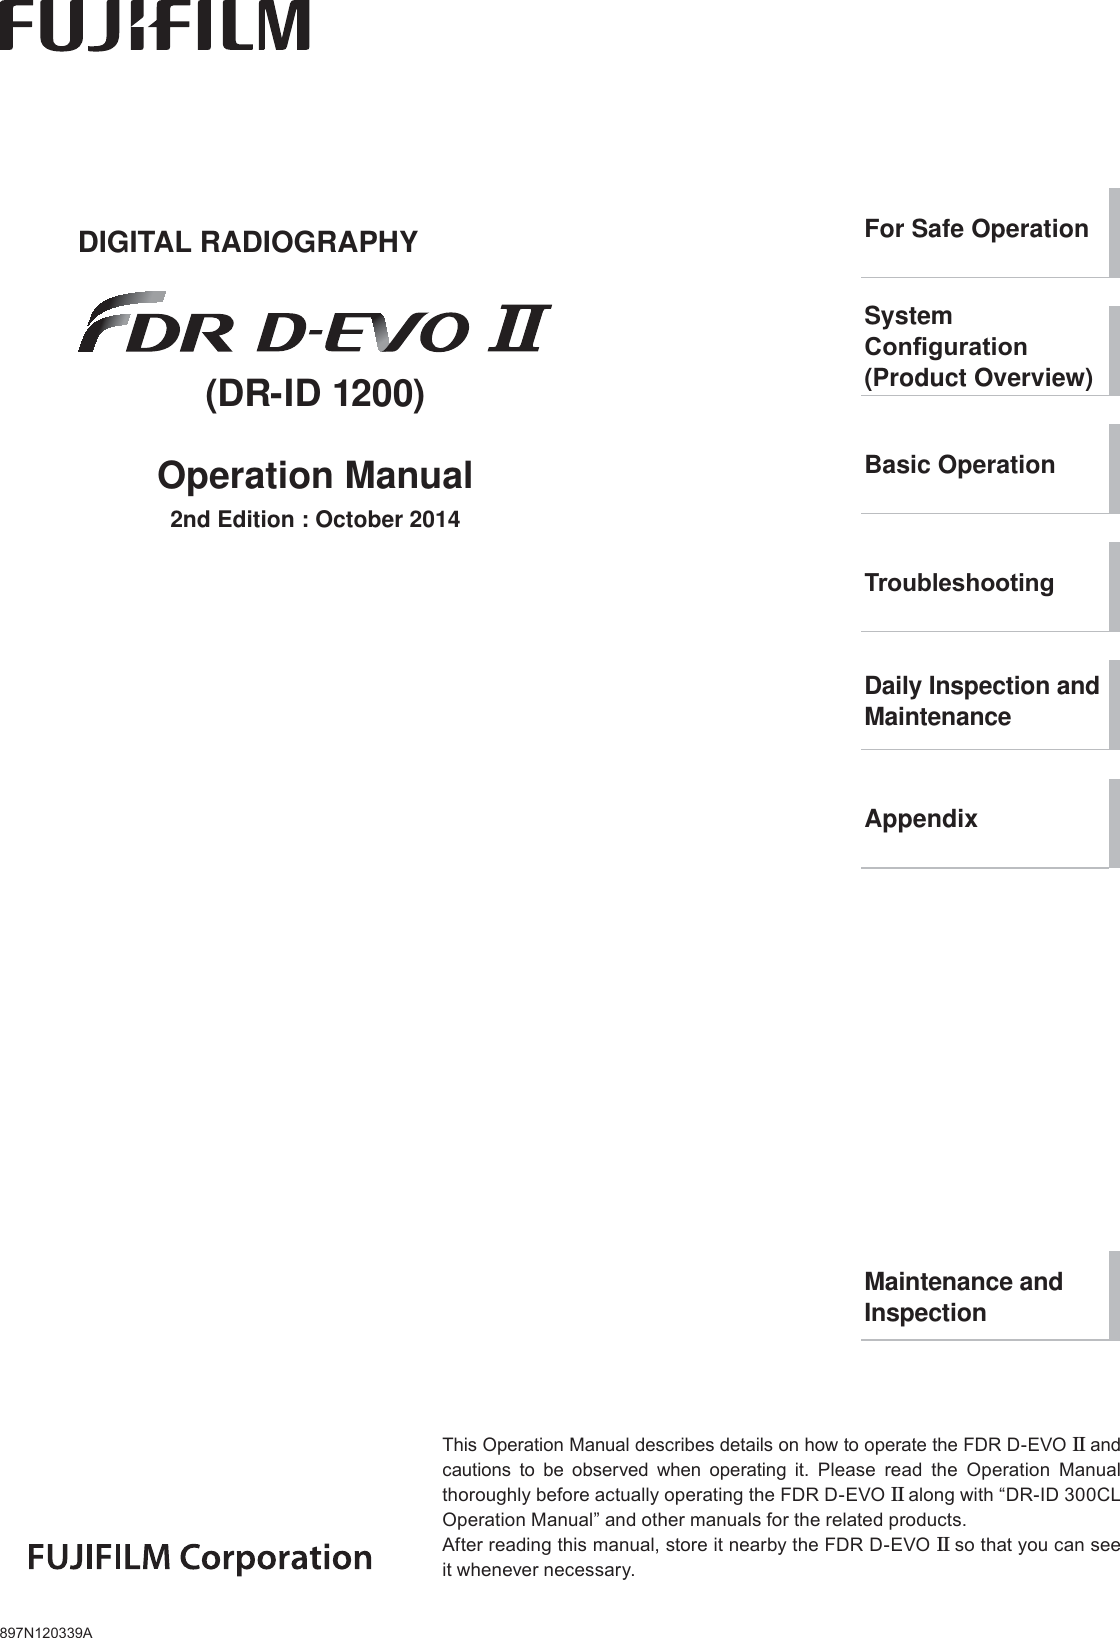 897N120339AThis Operation Manual describes details on how to operate the FDR D-EVO II and cautions to be observed when operating it. Please read the Operation Manual thoroughly before actually operating the FDR D-EVO II along with “DR-ID 300CL Operation Manual” and other manuals for the related products.After reading this manual, store it nearby the FDR D-EVO II so that you can see it whenever necessary.DIGITAL RADIOGRAPHY(DR-ID 1200)Operation Manual2nd Edition : October 2014For Safe OperationSystem  &amp;RQ¿JXUDWLRQ(Product Overview)Basic Operation7URXEOHVKRRWLQJDaily Inspection and MaintenanceAppendixMaintenance and Inspection